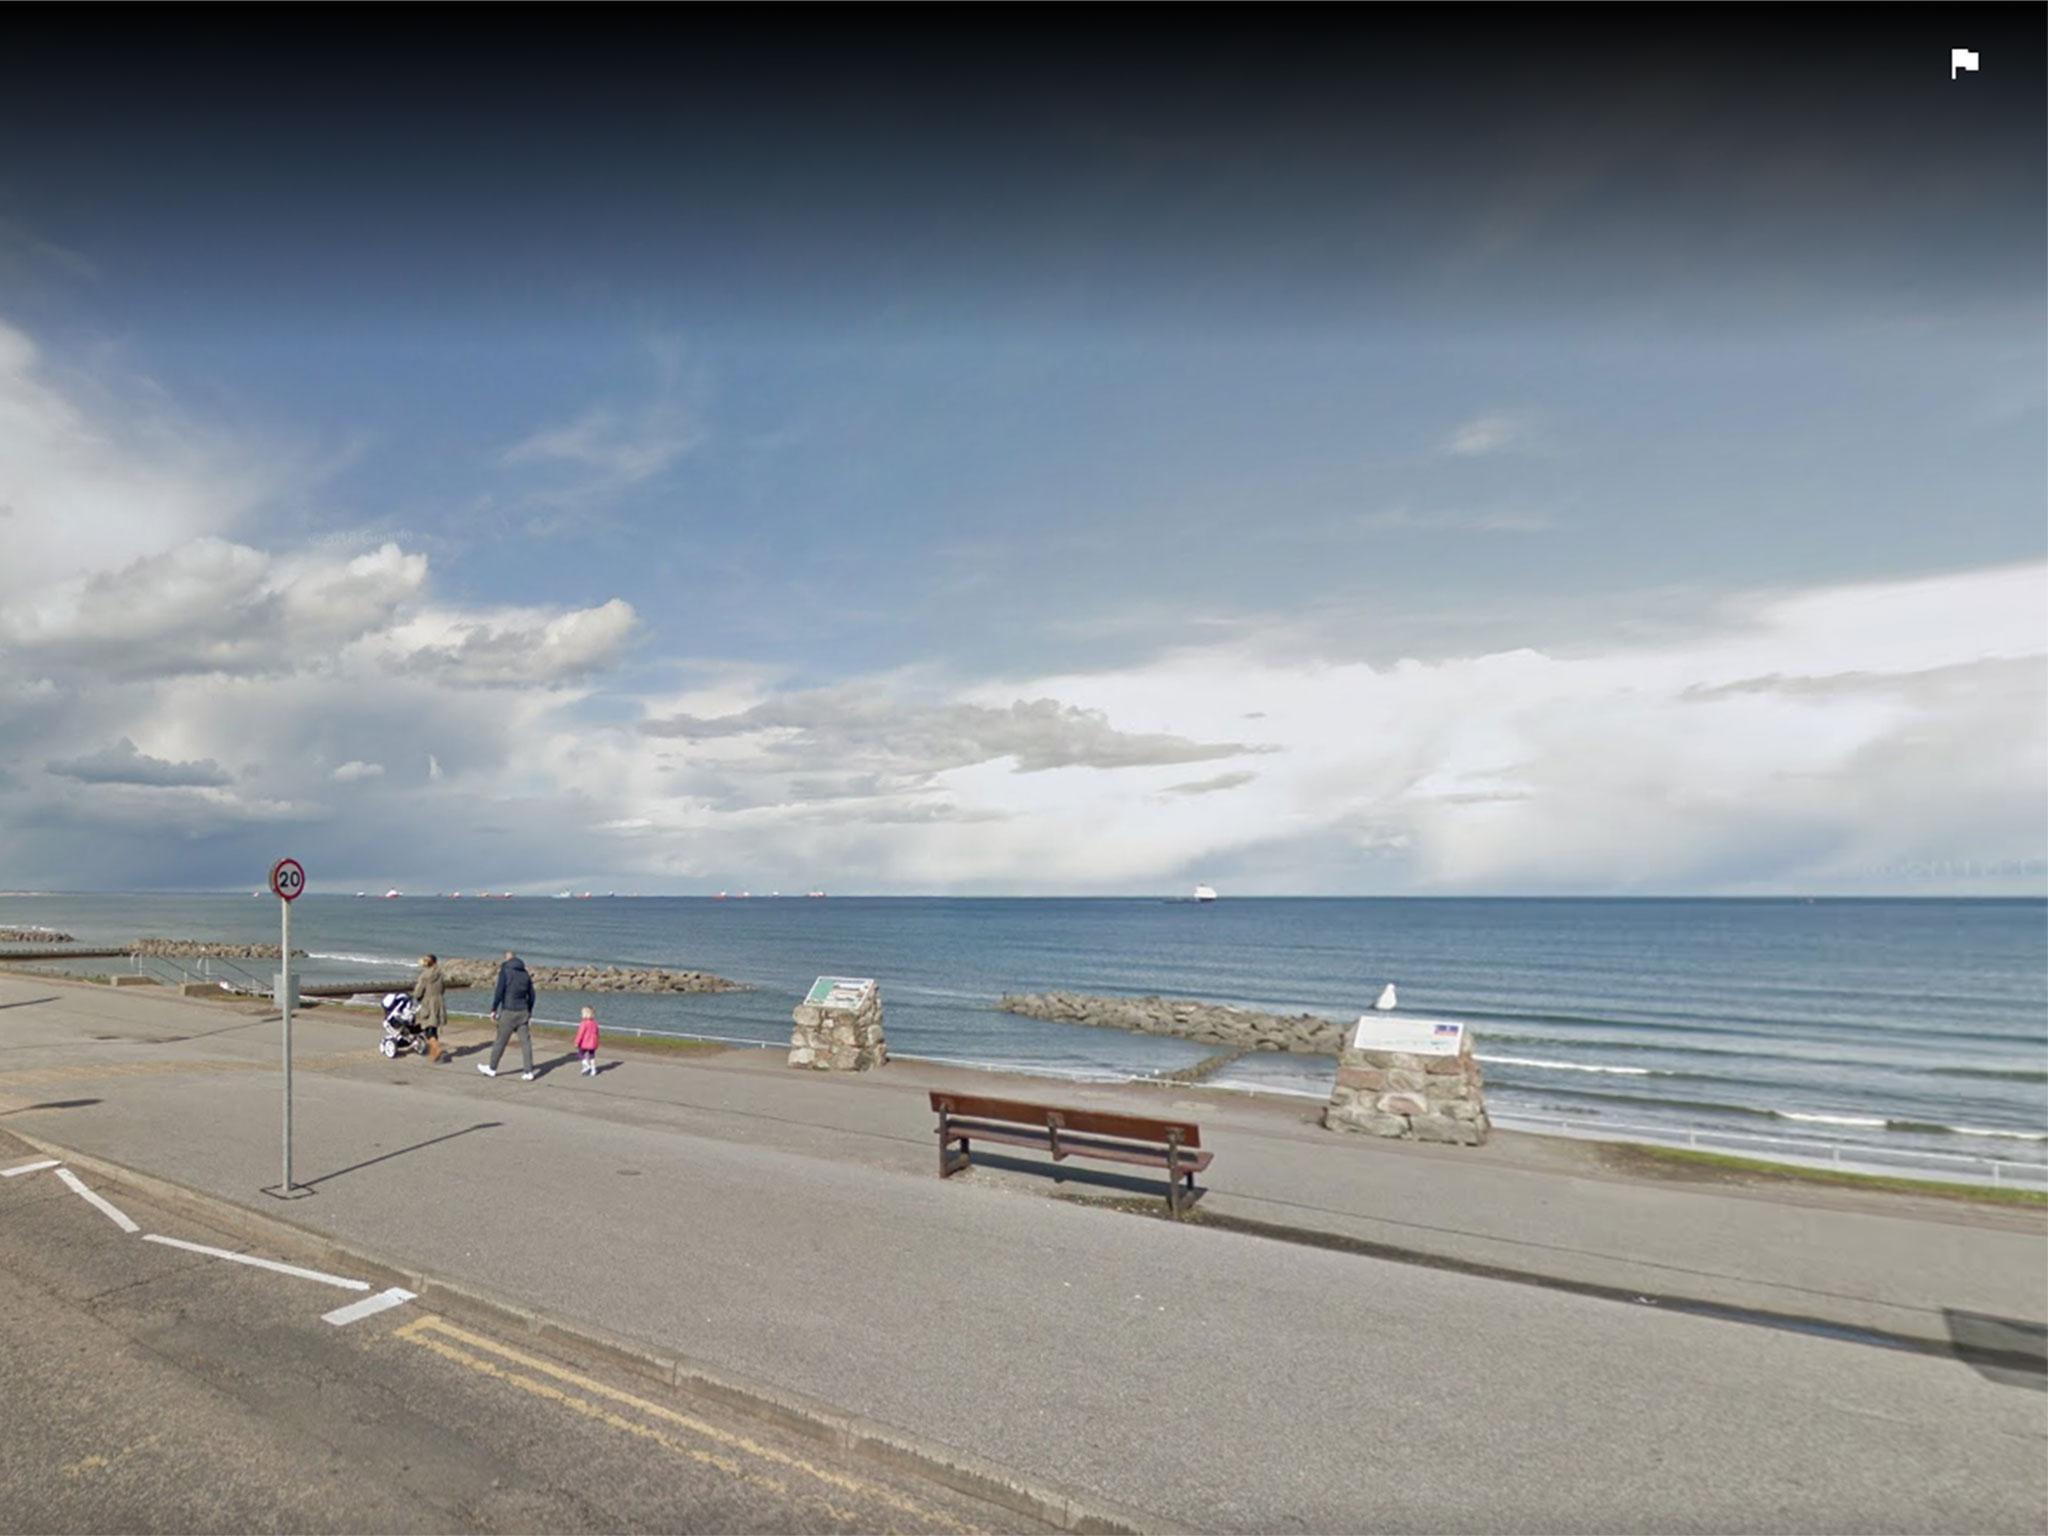 The section of Aberdeen beach near pizza hut, where the incident is reported to have taken place